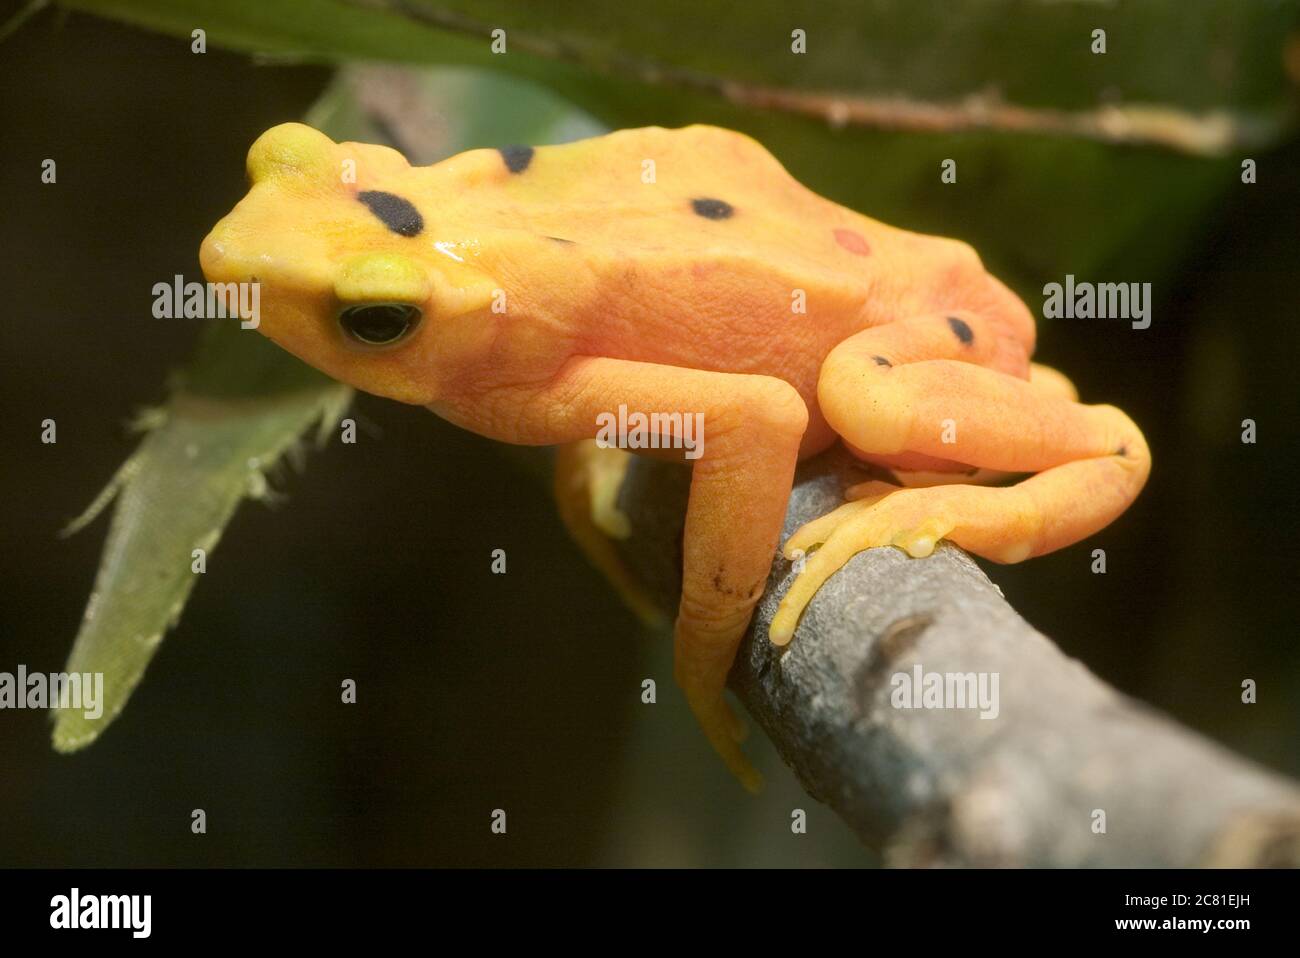 Closeup shot of a panamanian golden frog - perfect for background Stock Photo